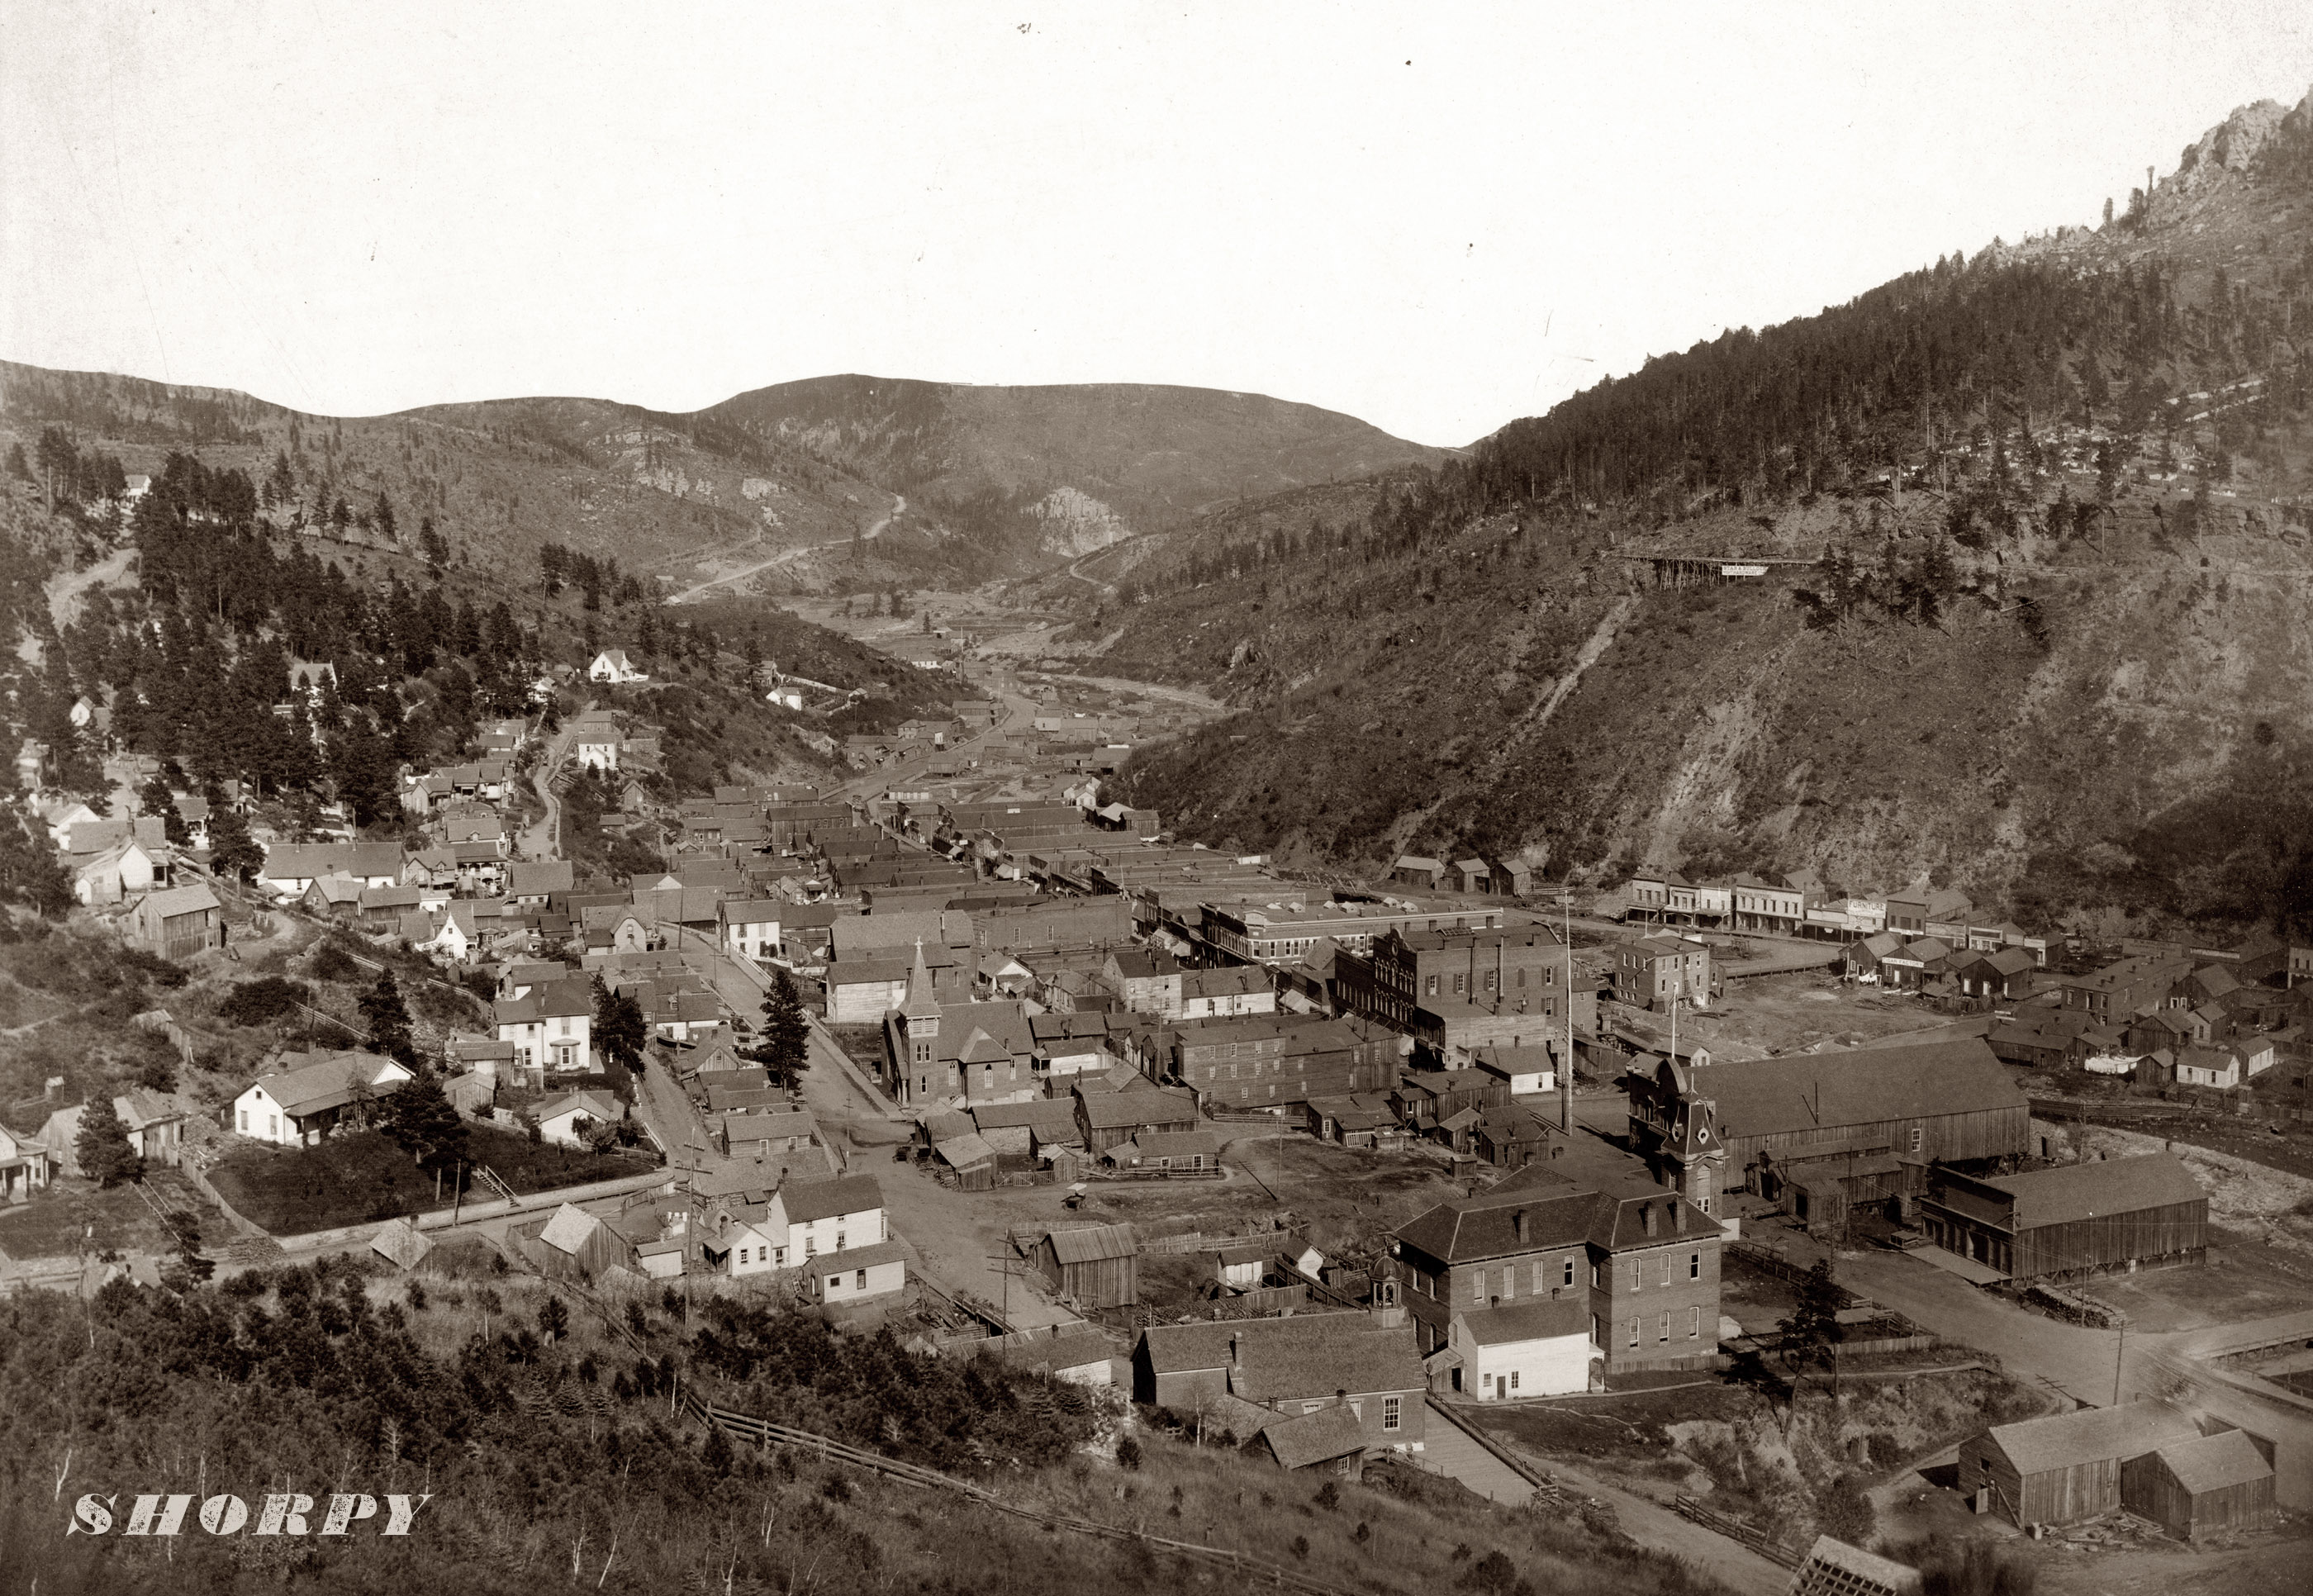 Deadwood, South Dakota, from Mrs. Livingston's Hill. View full size or zoom in. Circa 1888 photograph by John C.H. Grabill. Another Deadwood shot here.